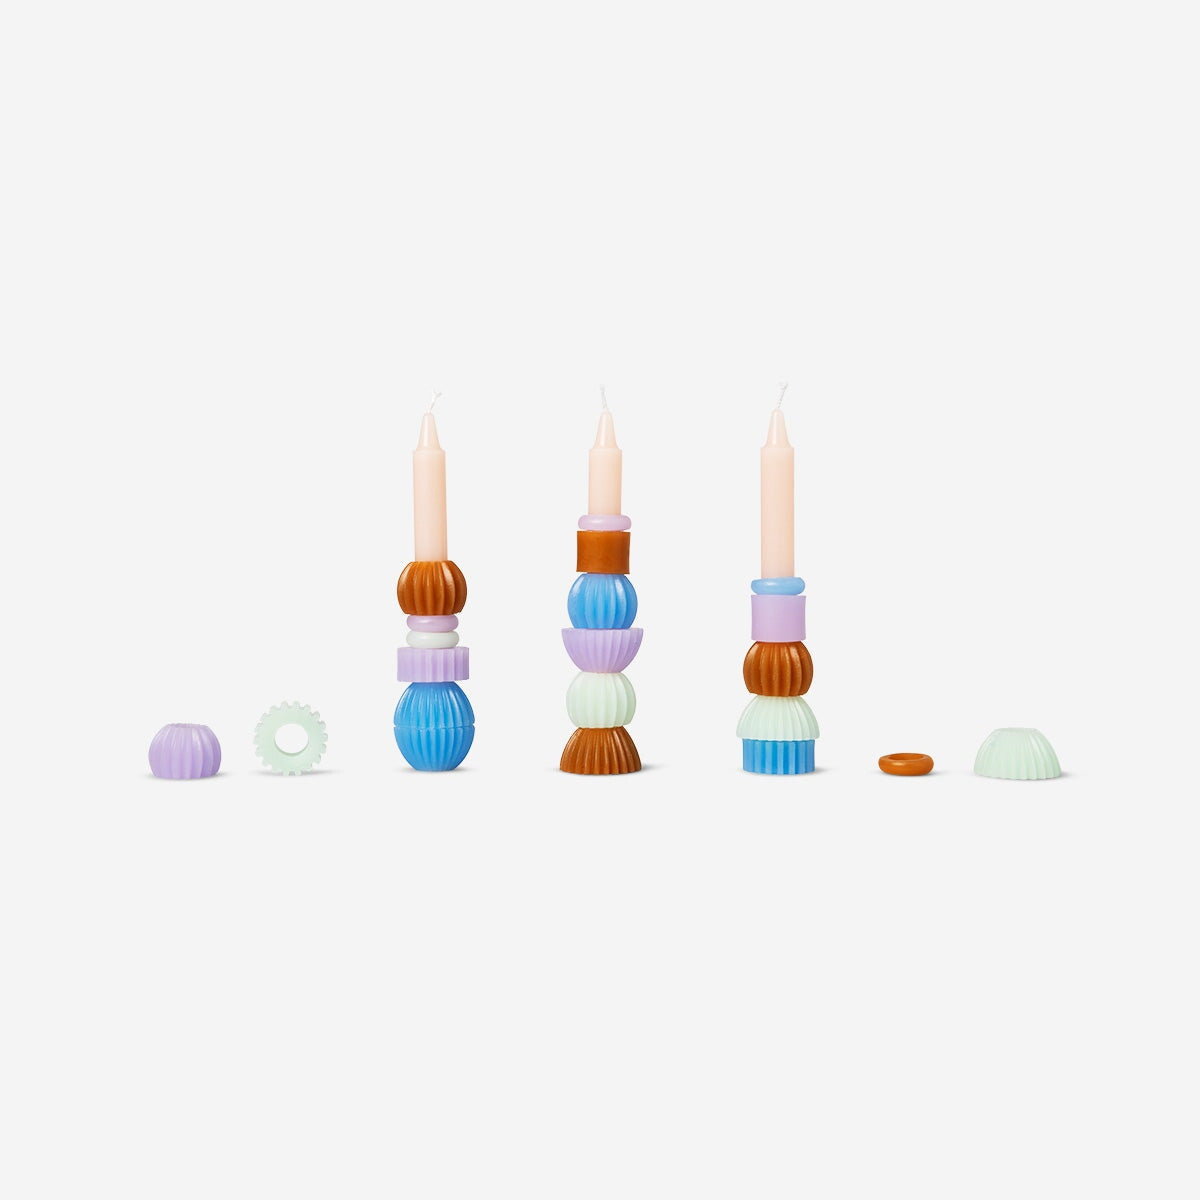 Image of Build your own candles. 3 pcs